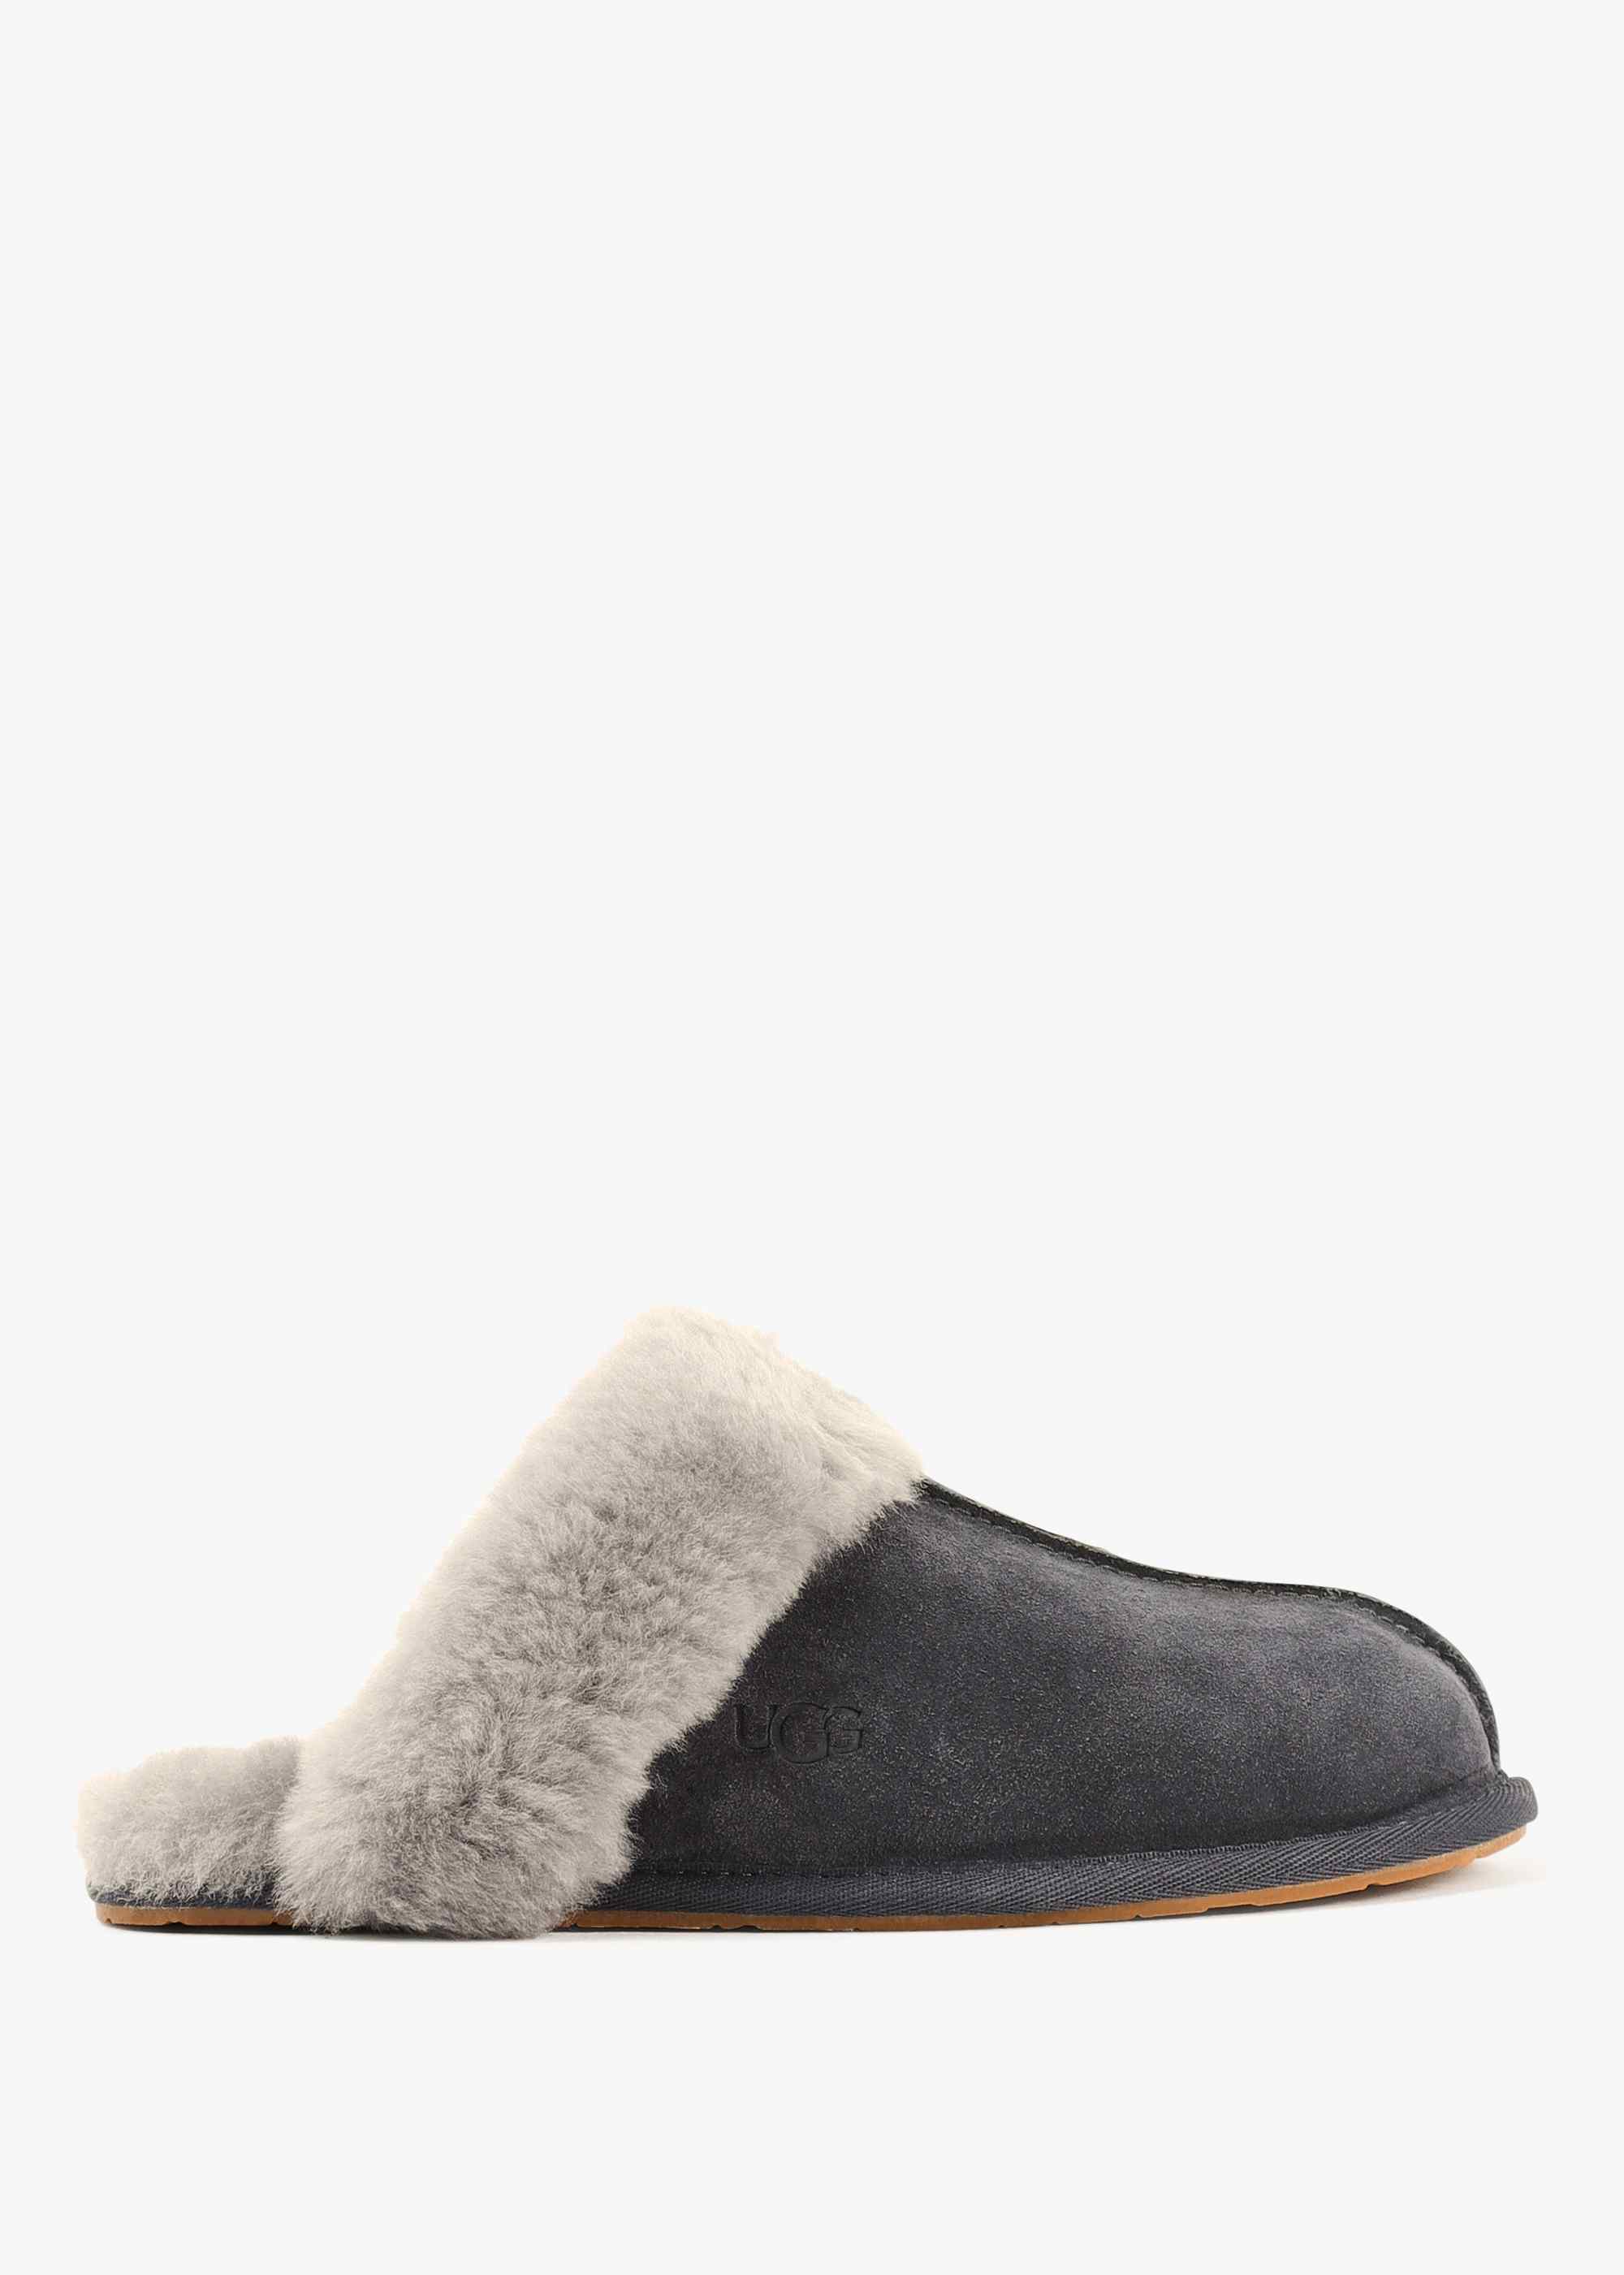 Image of Ugg Womens Scuffette Ii Slipper In Eve Blue/Lighthouse